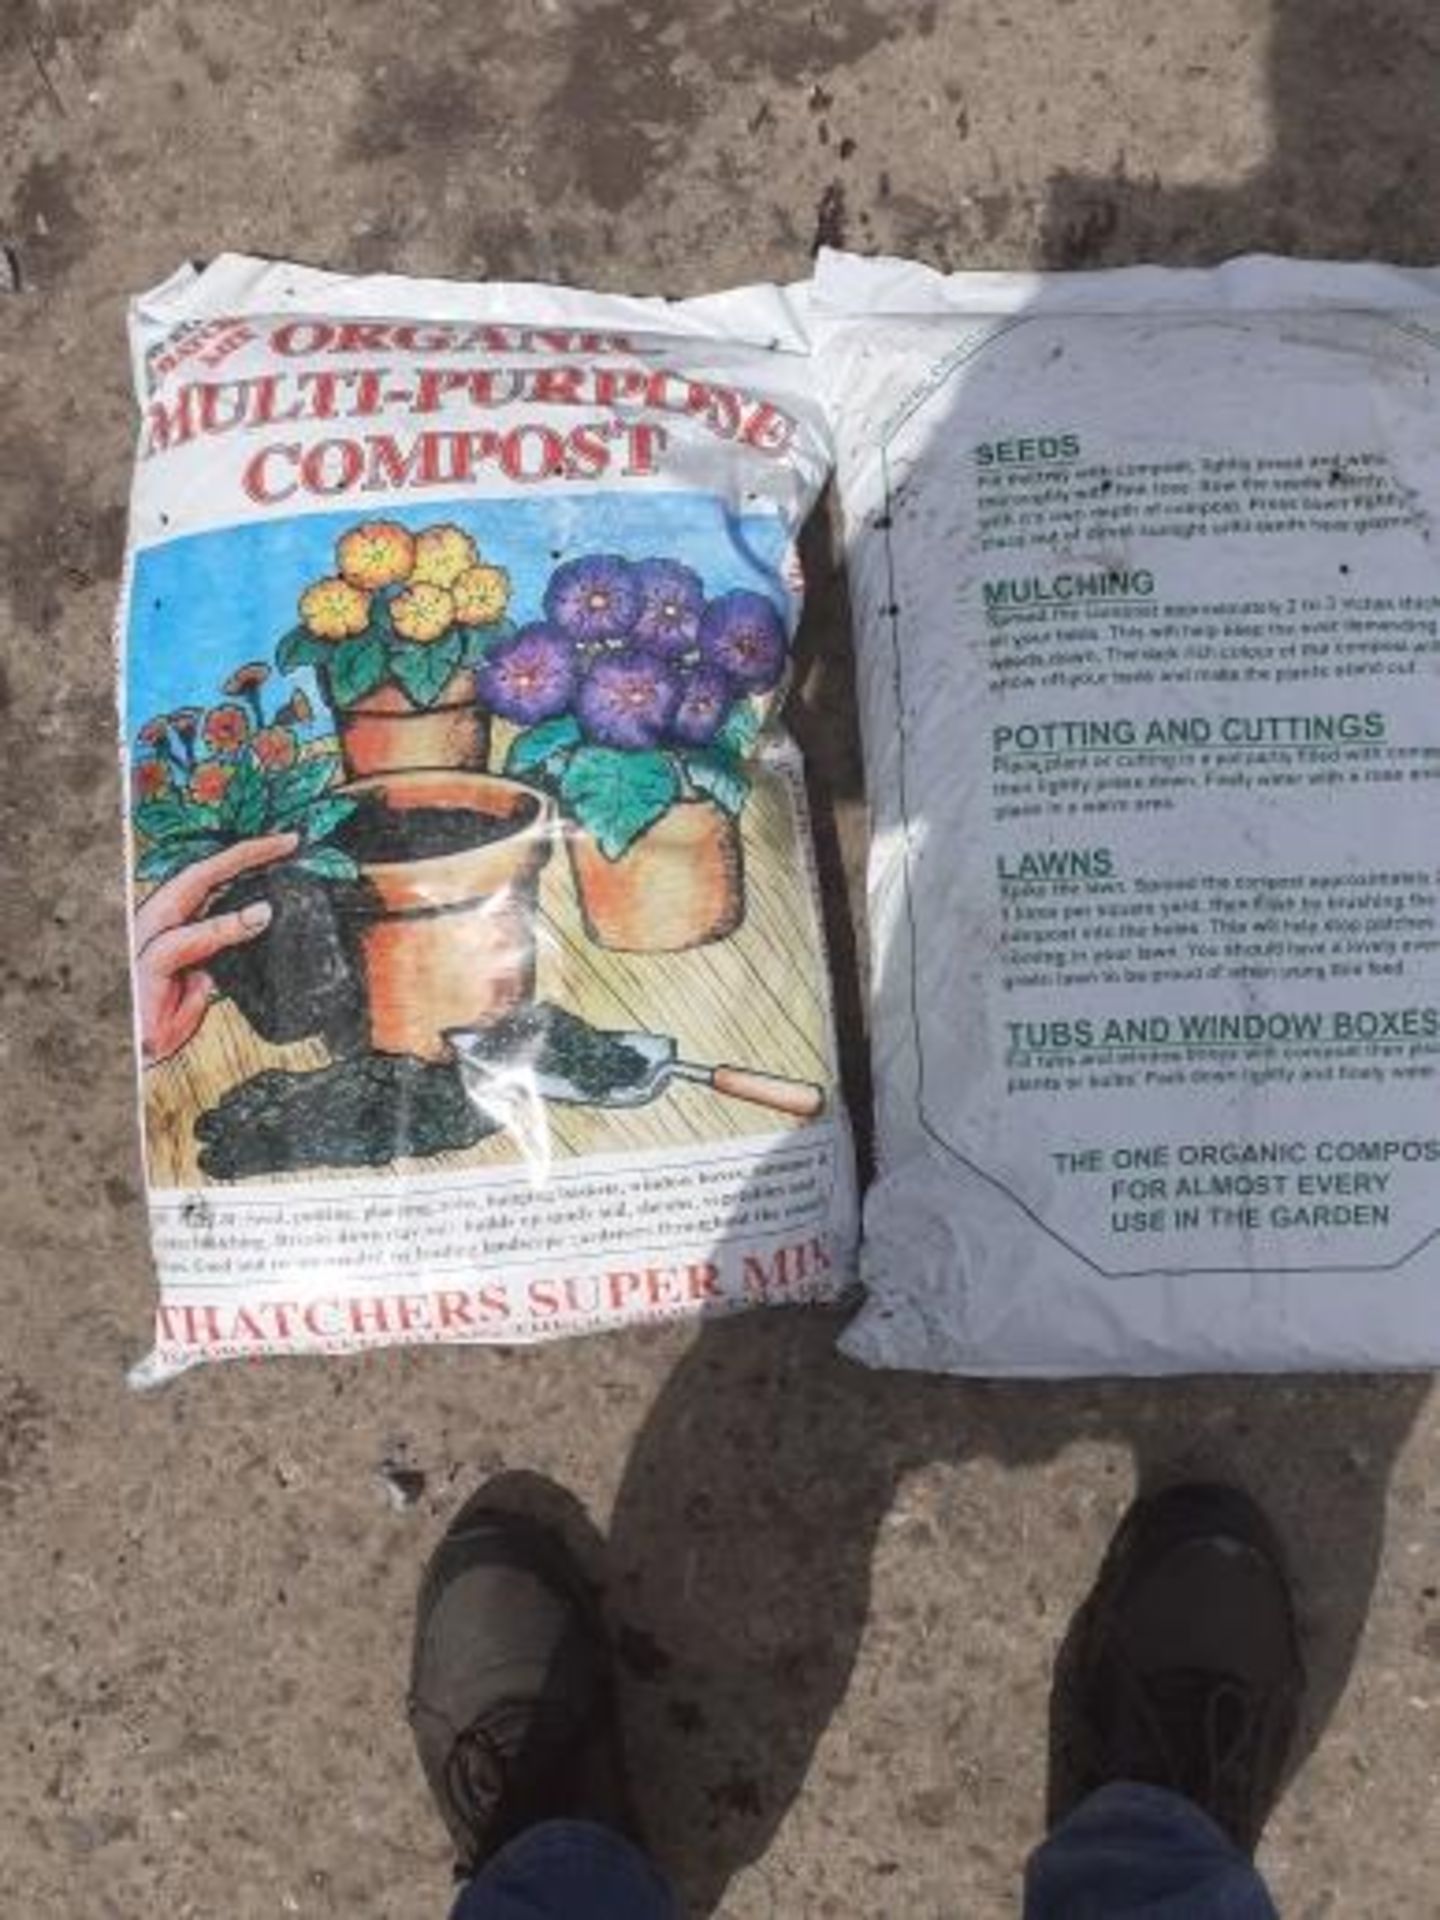 1 PALLET OF TOP GRADE COMPOST, EACH BAG CONTAINS 40 LITRES, 75 BAGS PER PALLET, APPROX WEIGHT 800kg - Image 5 of 5